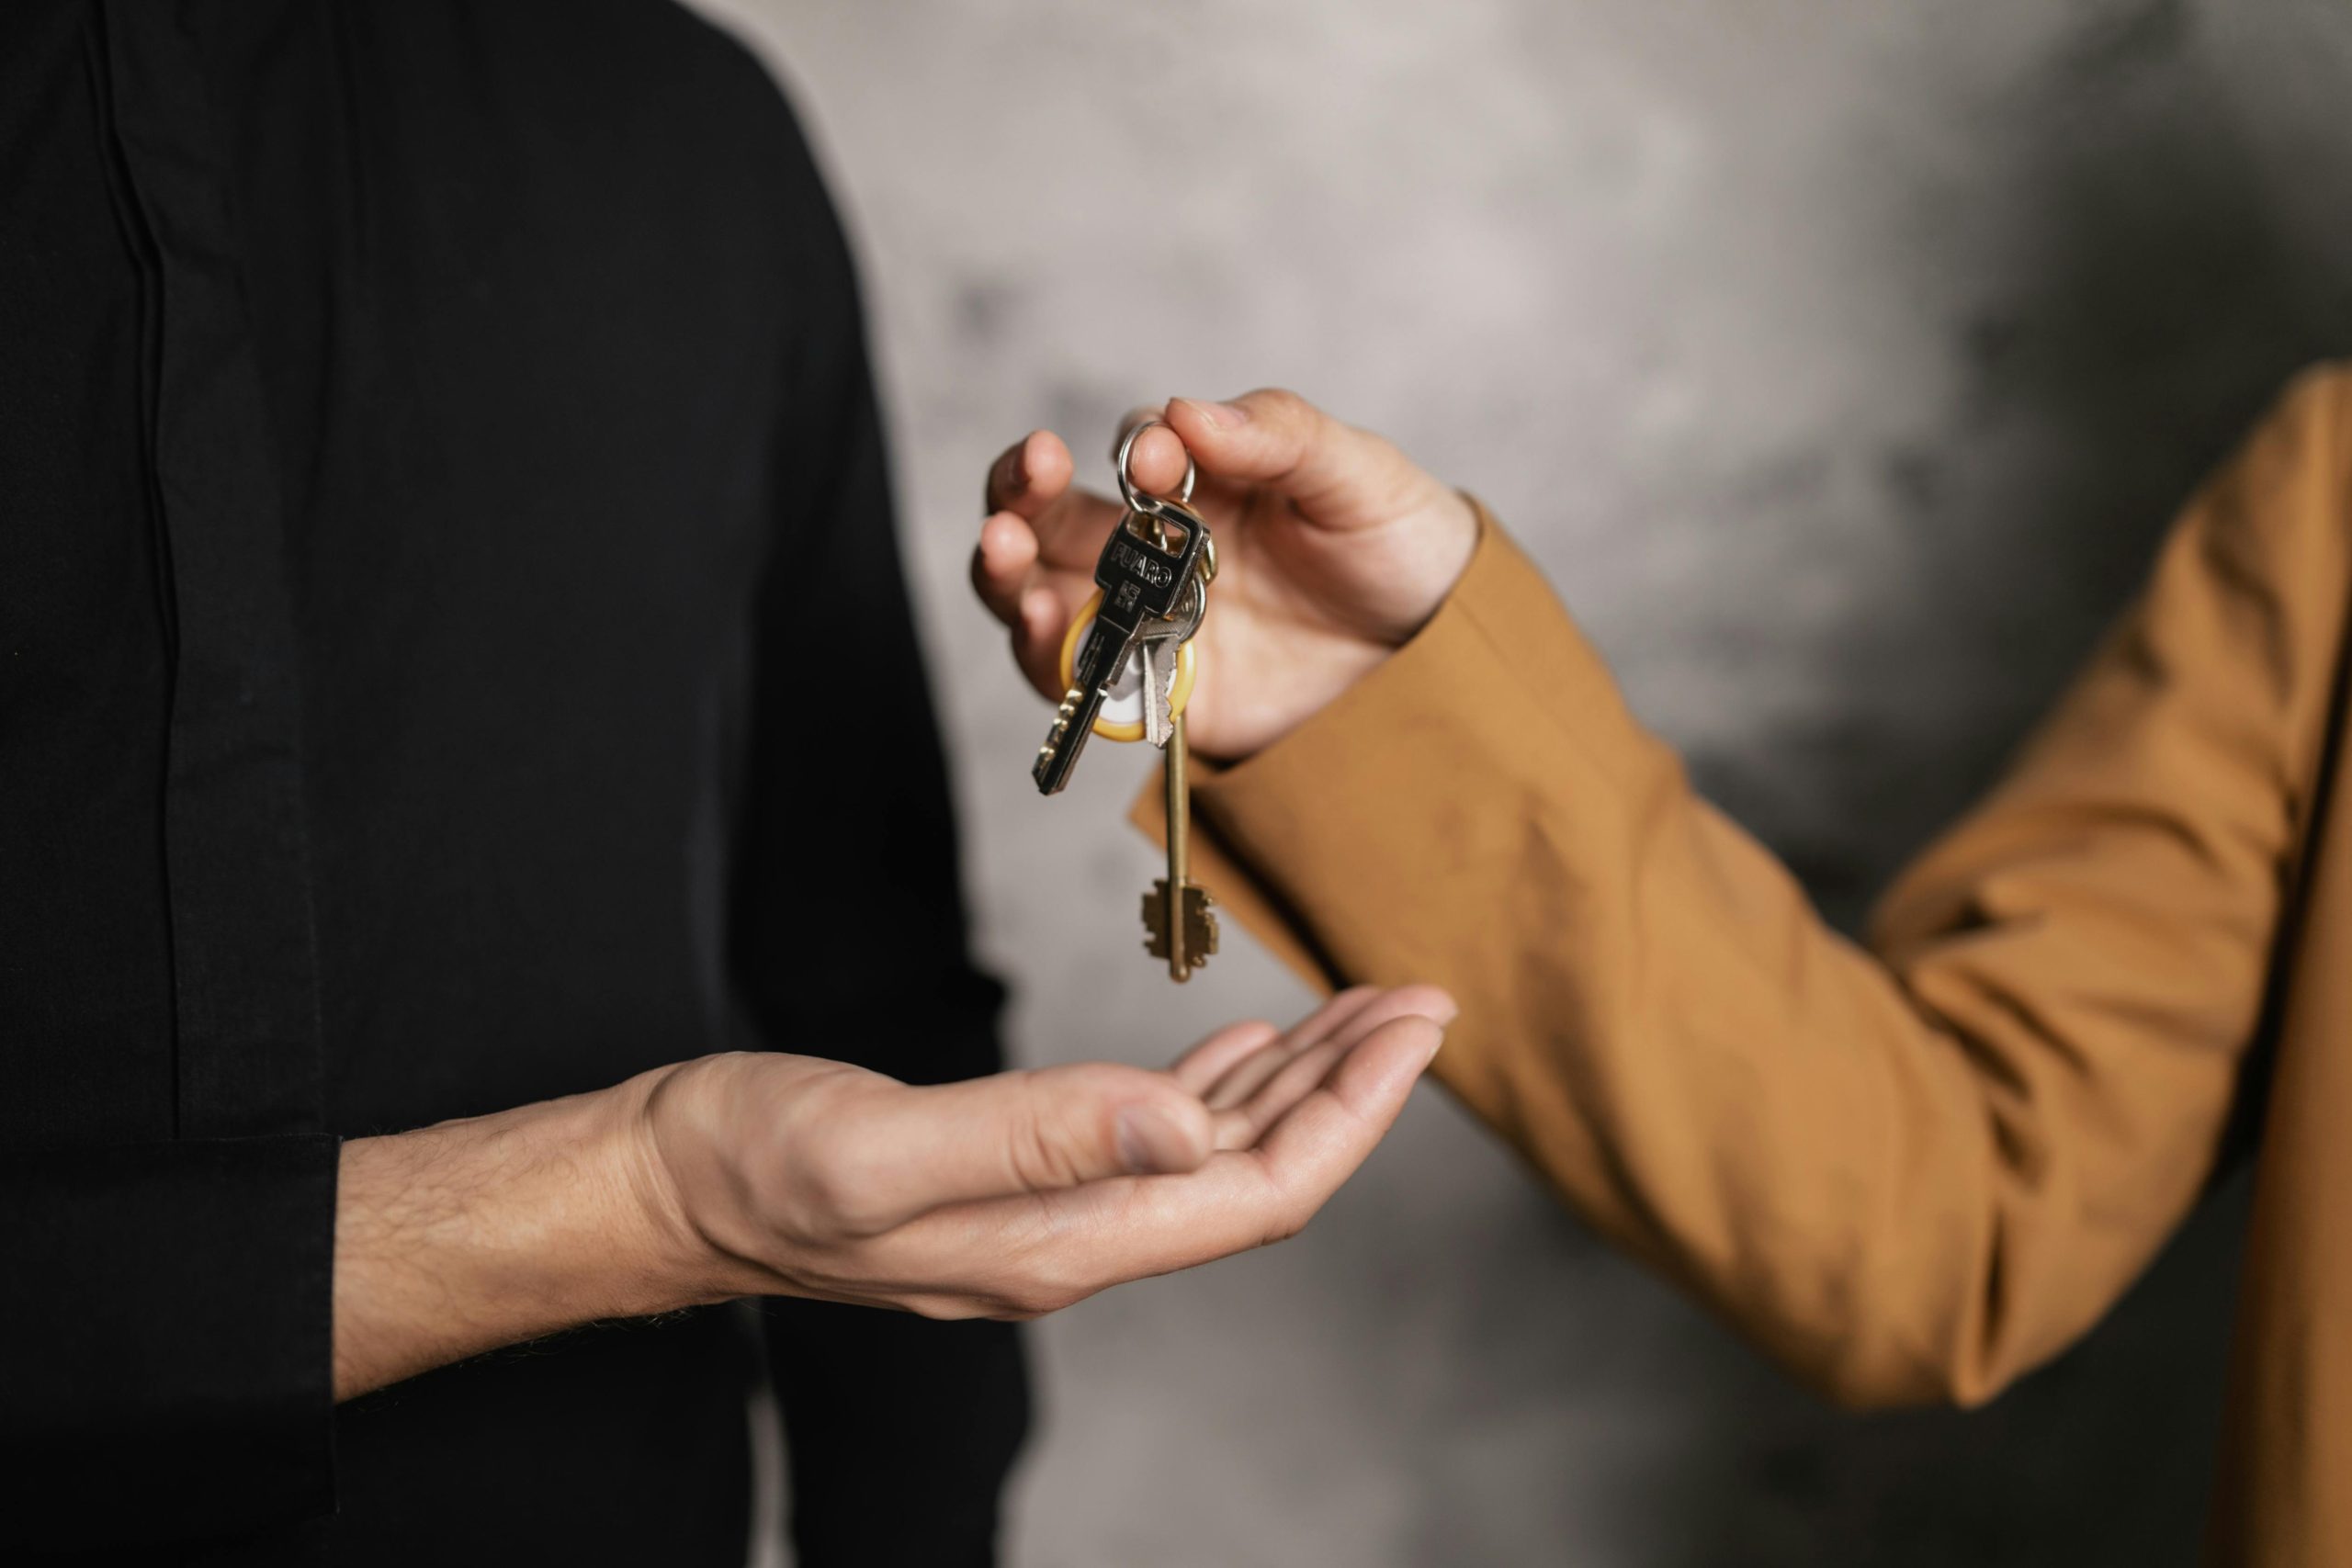 Image of a hand handing over a bundle of keys to another.